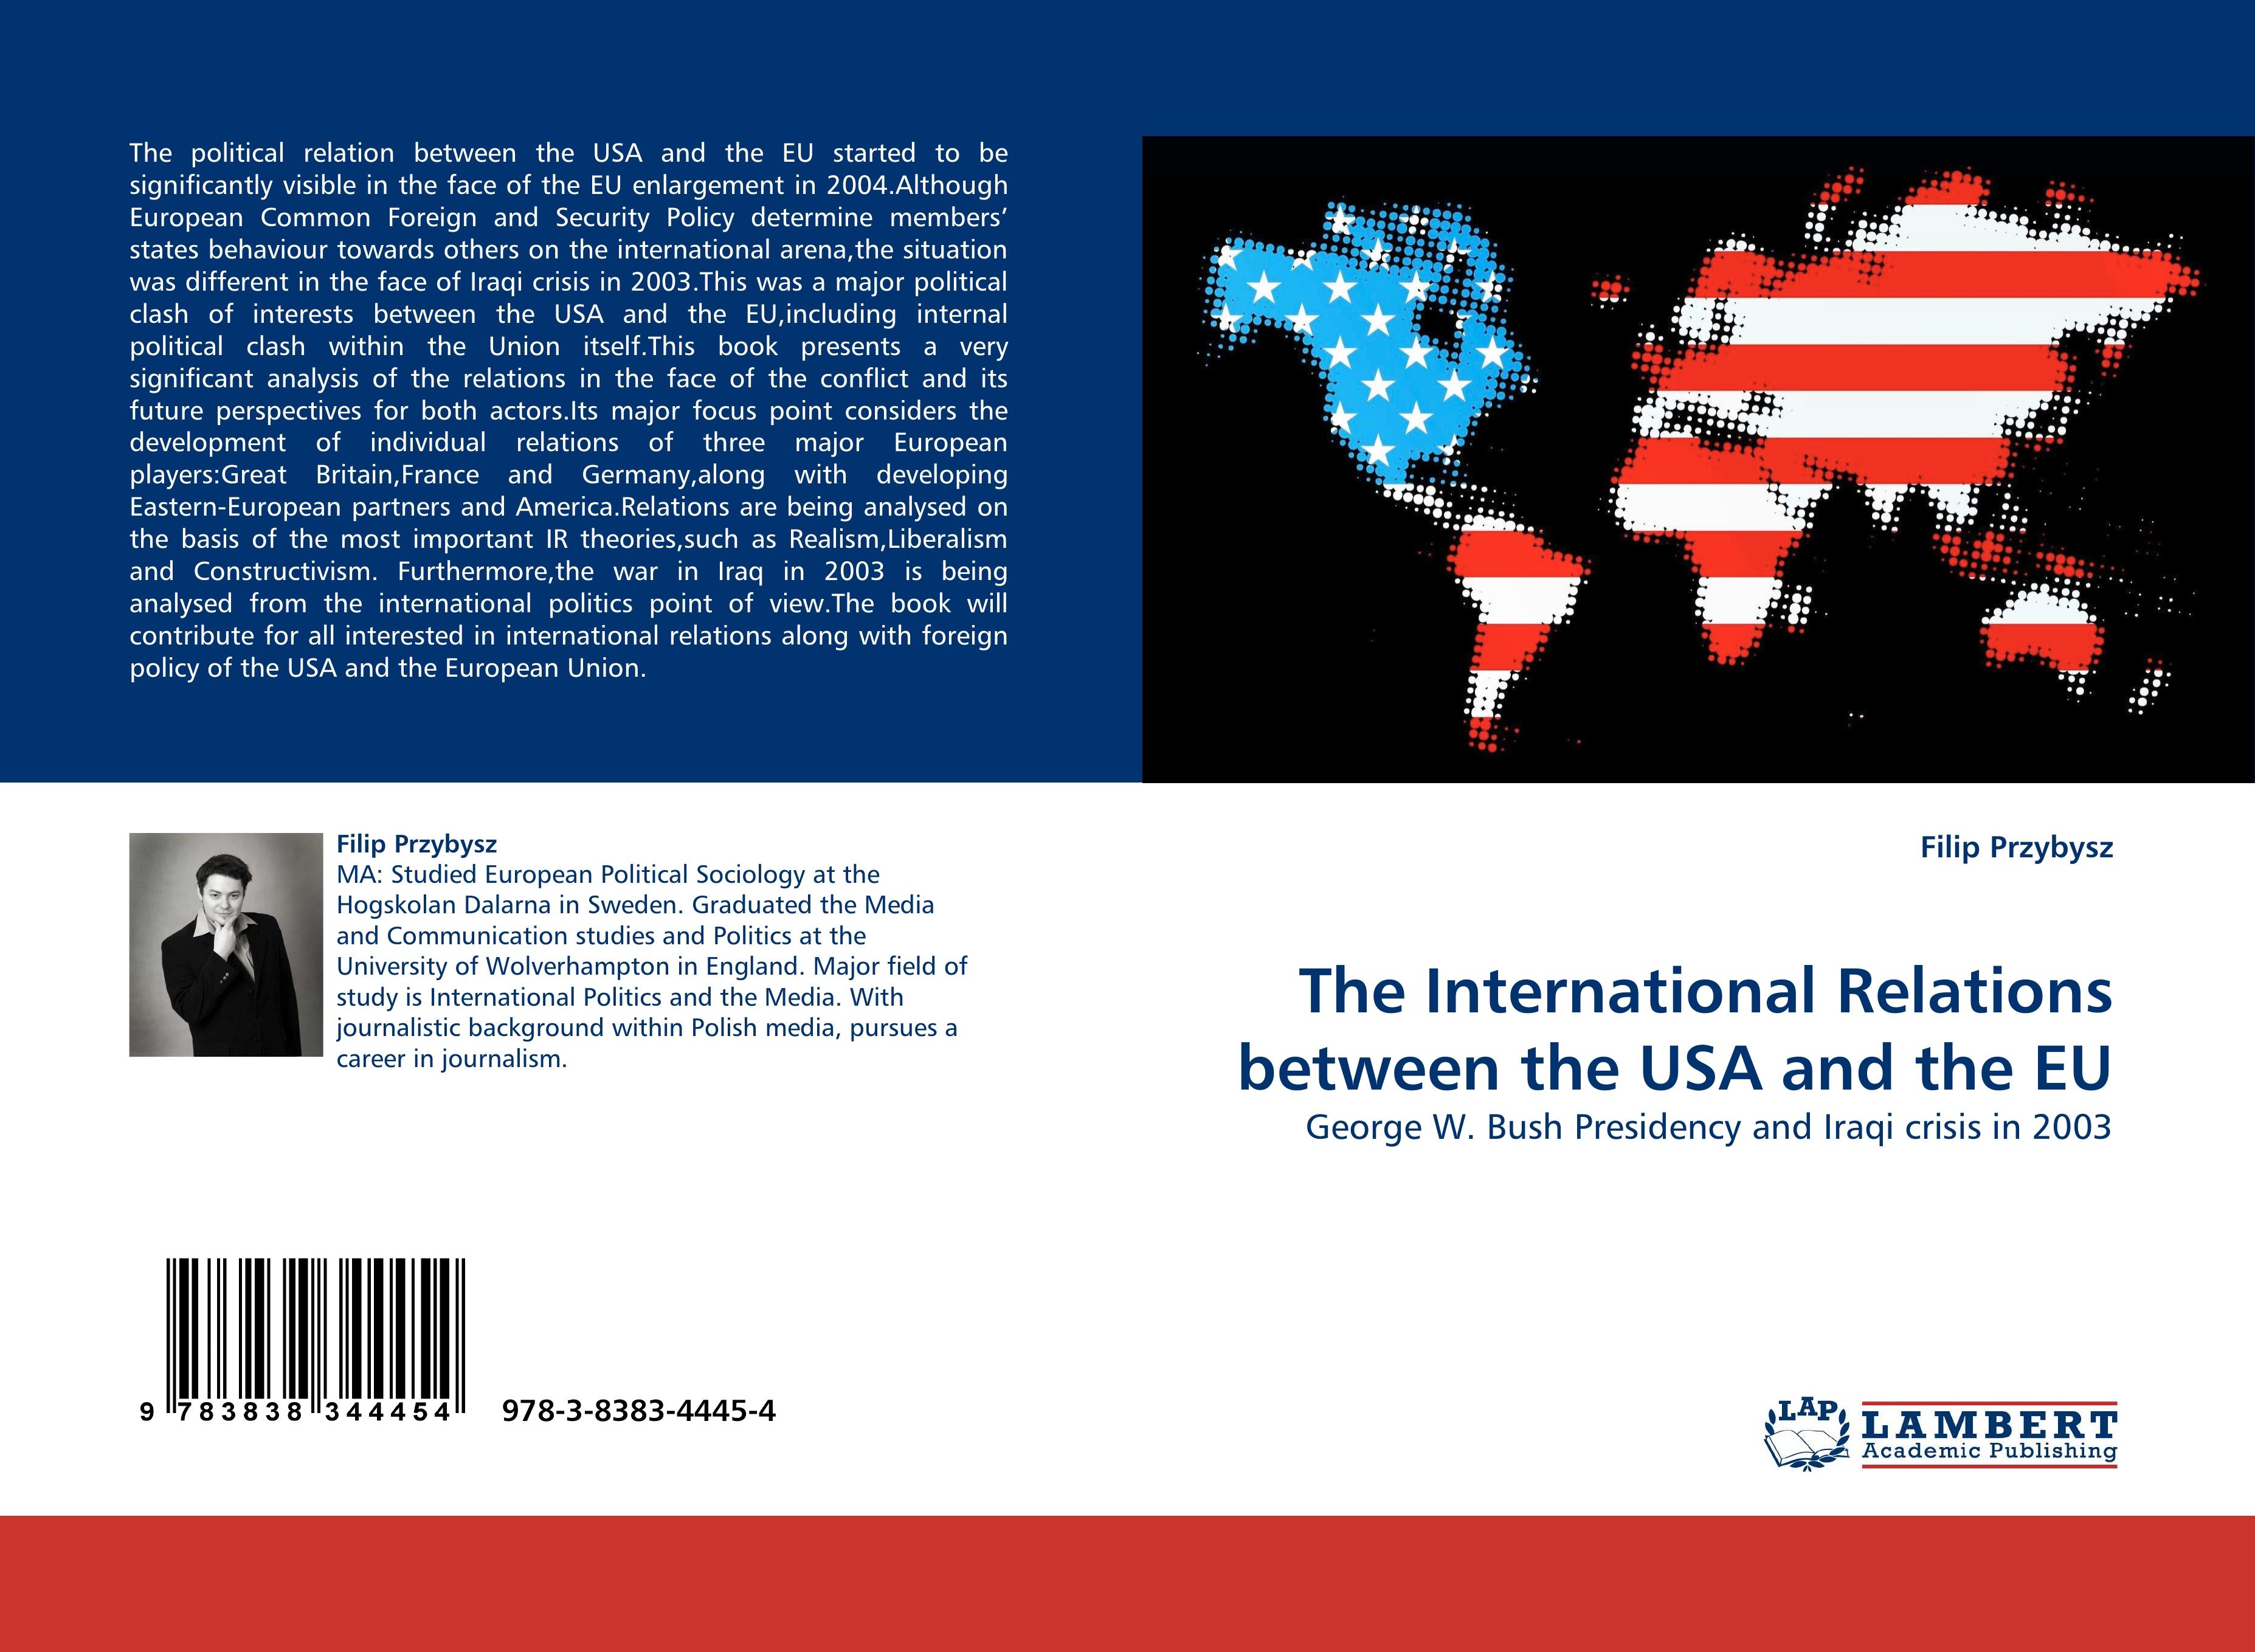 The International Relations between the USA and the EU | George W. Bush Presidency and Iraqi crisis in 2003 | Filip Przybysz | Taschenbuch | Paperback | Englisch | 2010 | EAN 9783838344454 - Przybysz, Filip